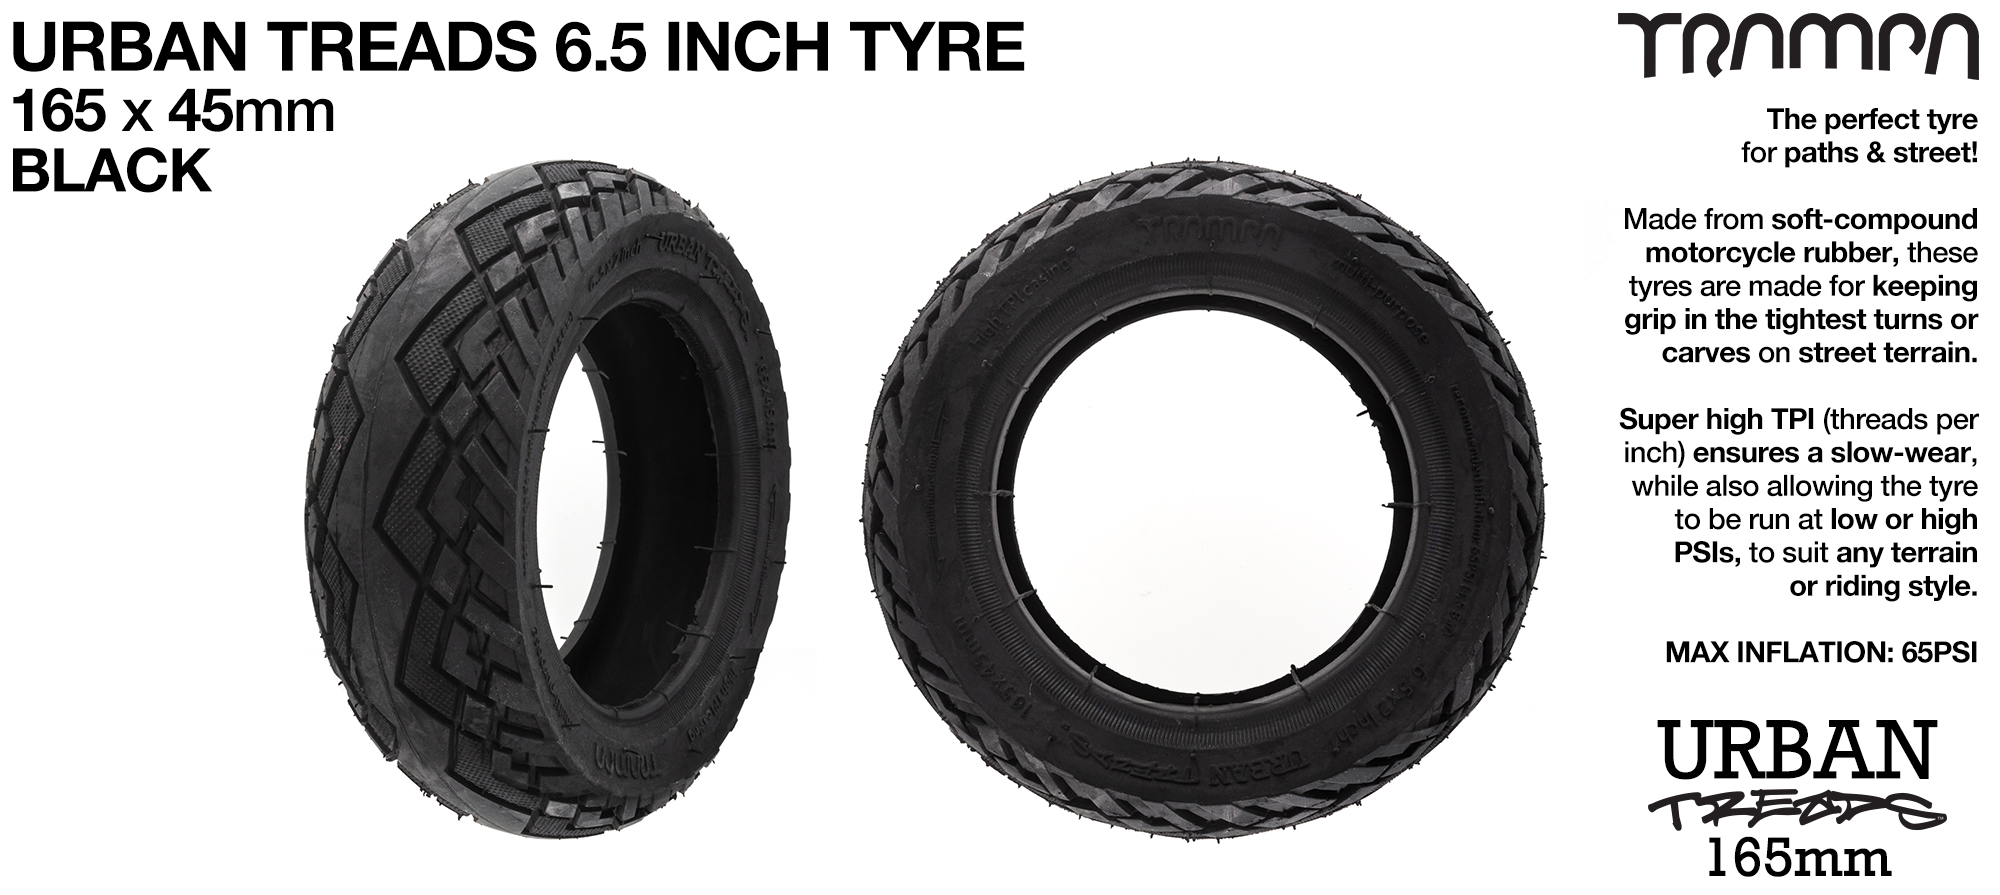 URBAN TREADS 6 Inch Tyre measures 3.75x 1.75x 6.5 Inch or 165x 45mm with 3.75 inch Rim & fits all 3.75 inch Hubs - BLACK